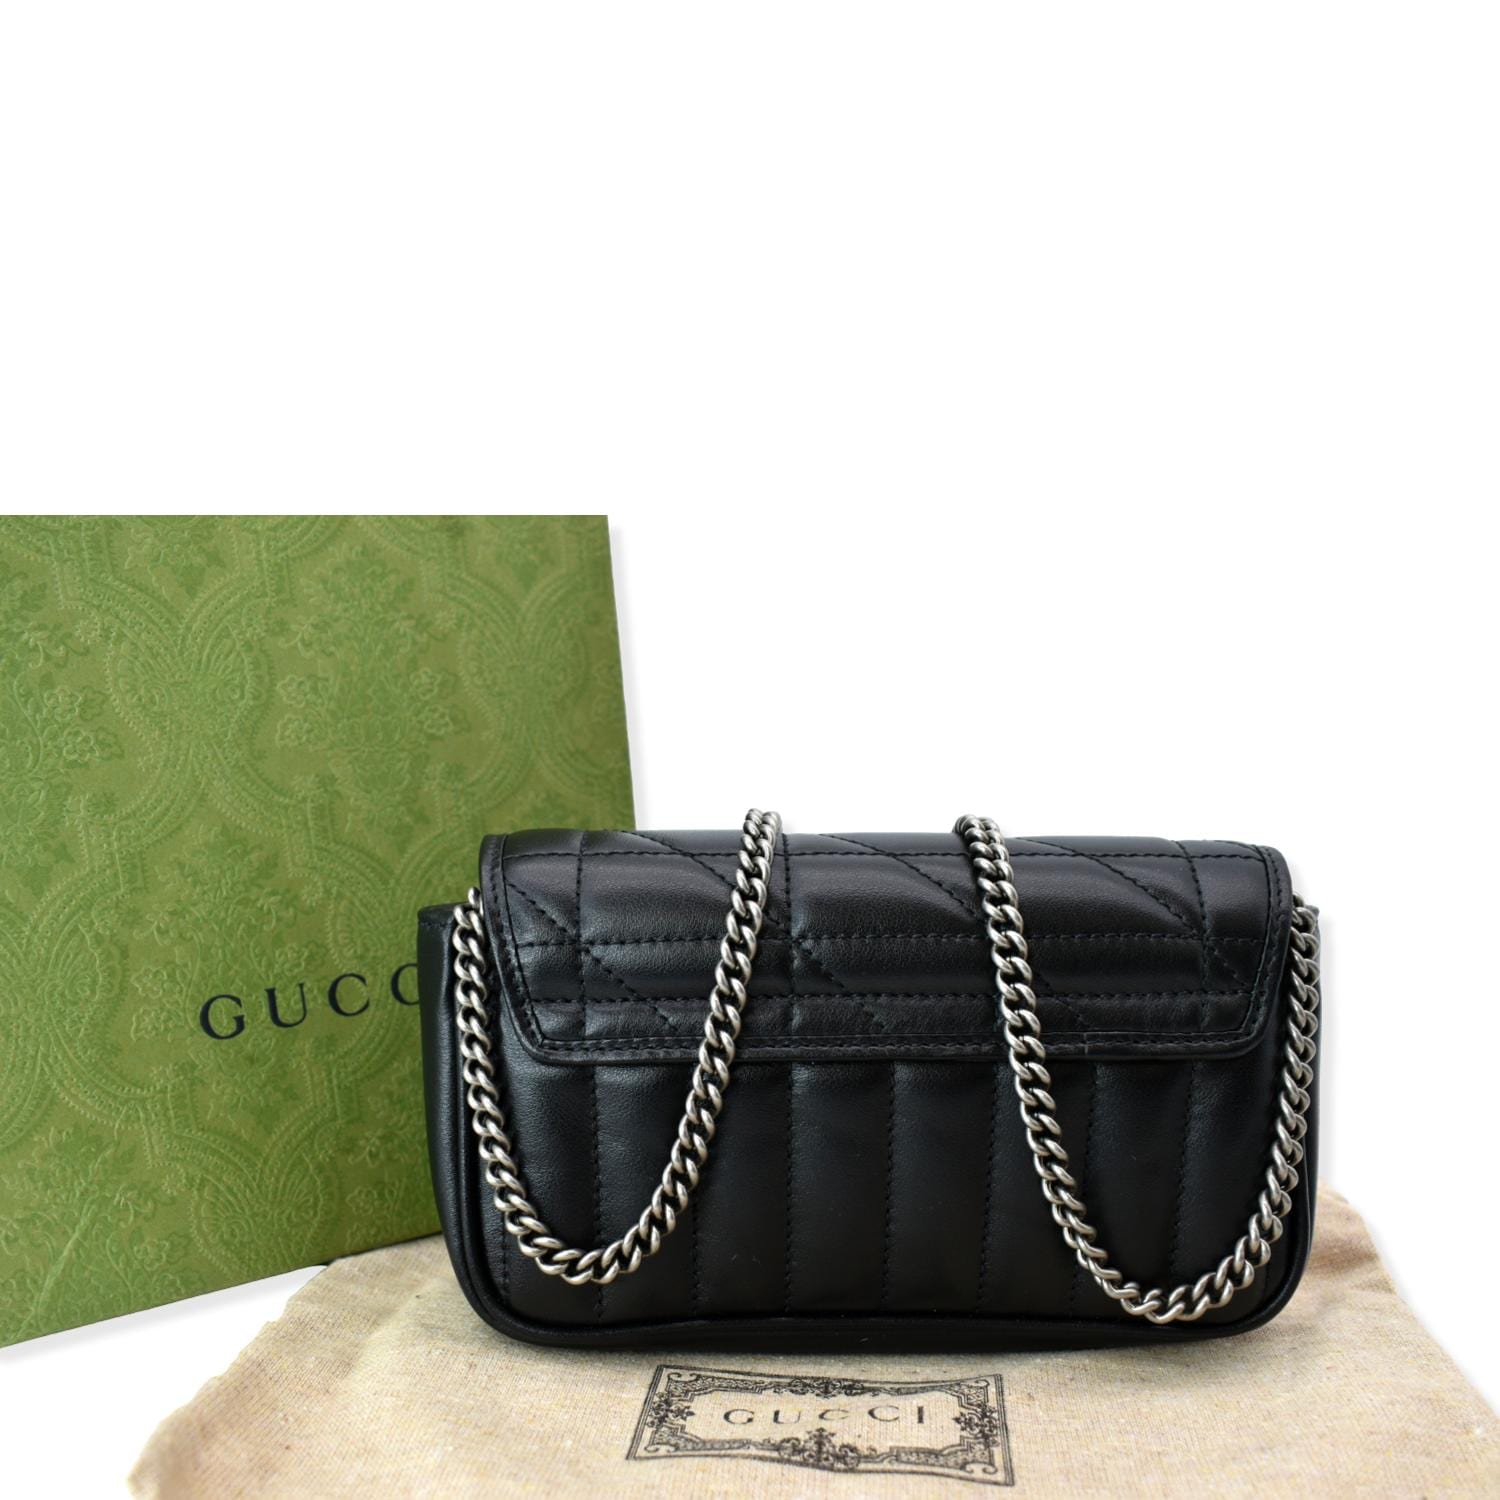 GUCCI, Marmont Gg Super Mini Quilted Shoulder Bag, Women, Crossbody Bags